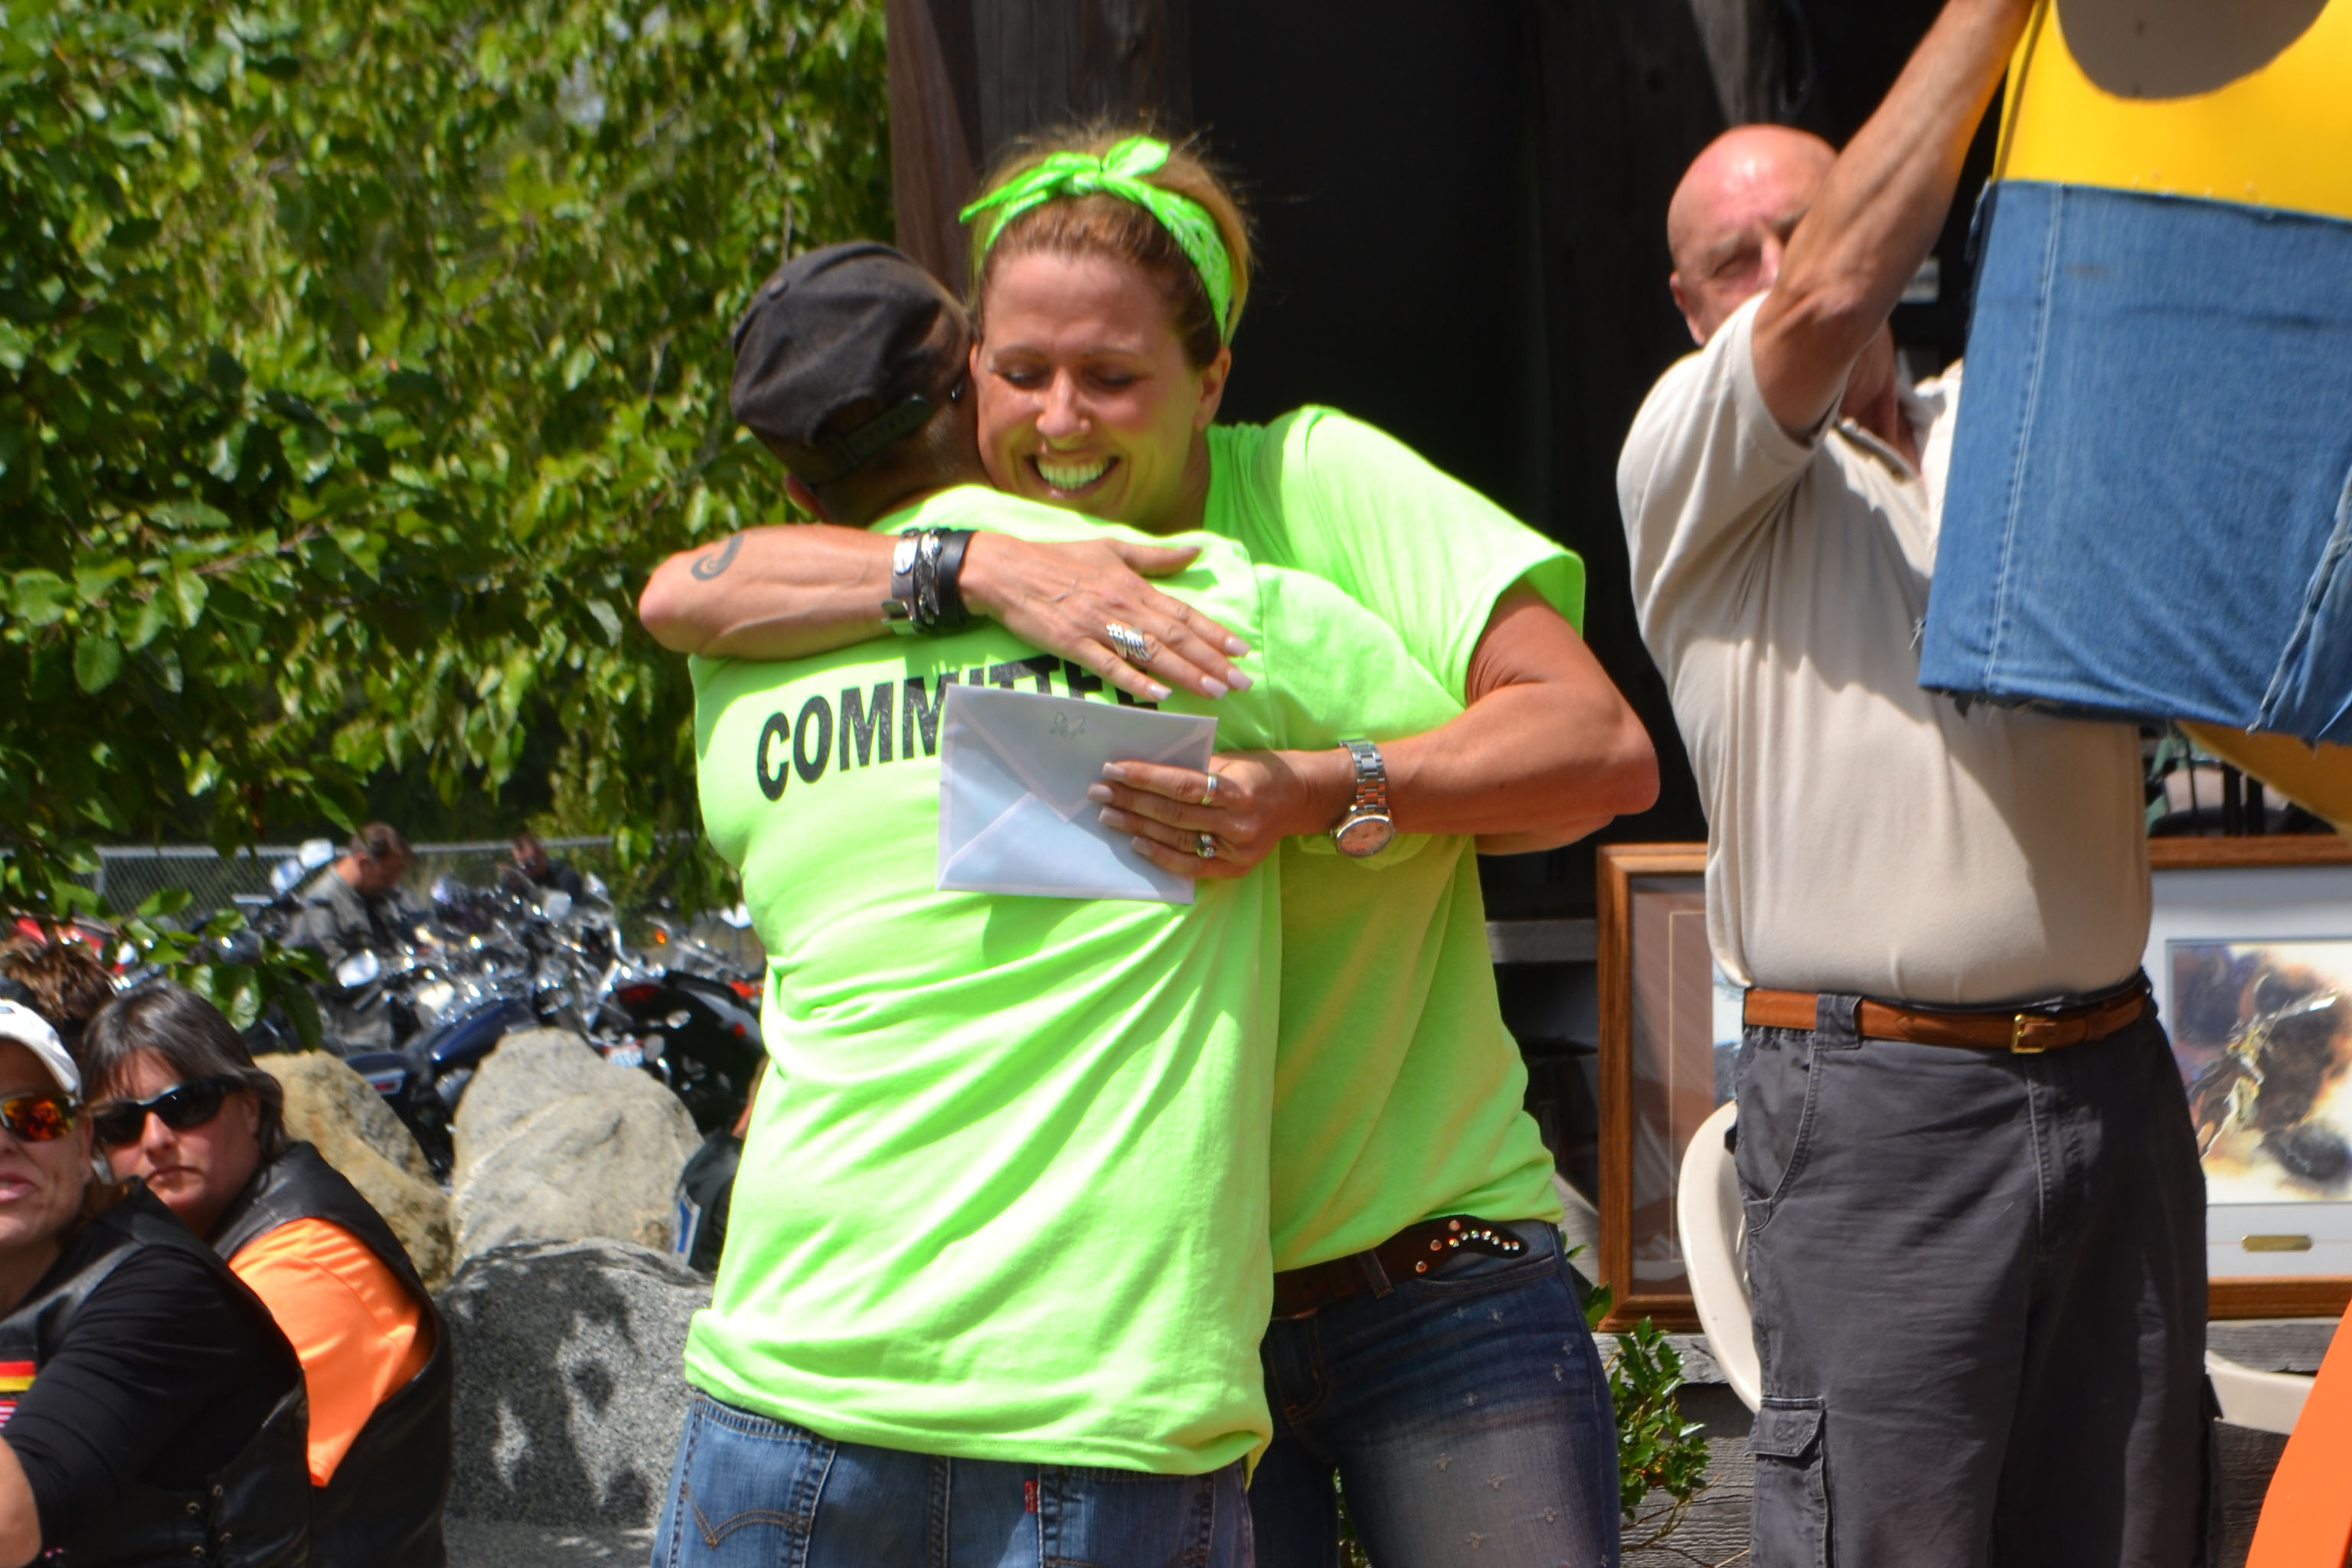 Two Ride for Life committee members embracing each other.